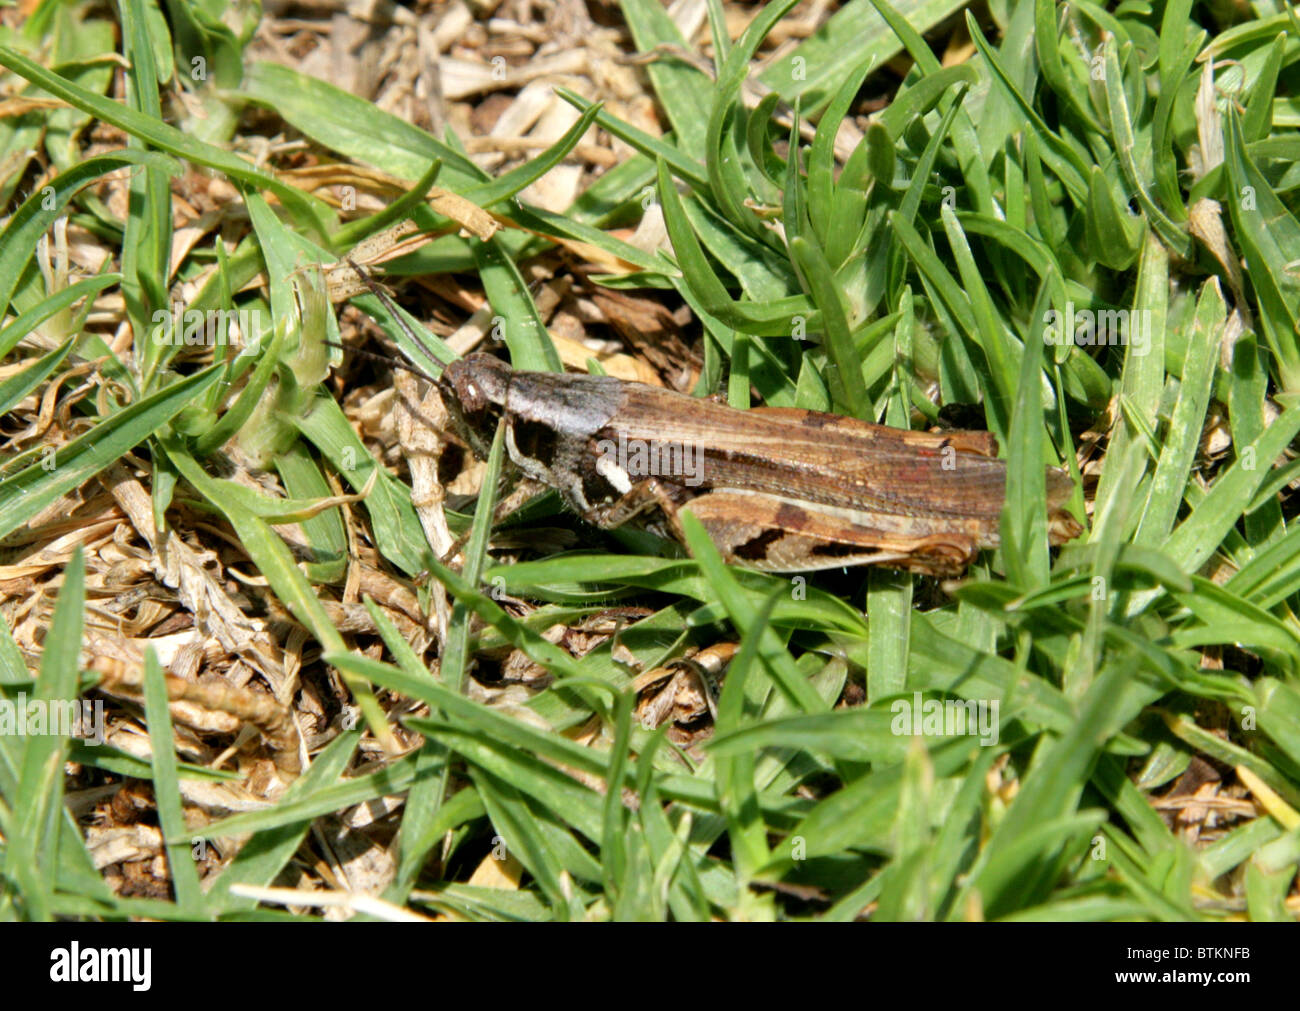 South African Grasshopper, Orthoptera, South Africa Stock Photo